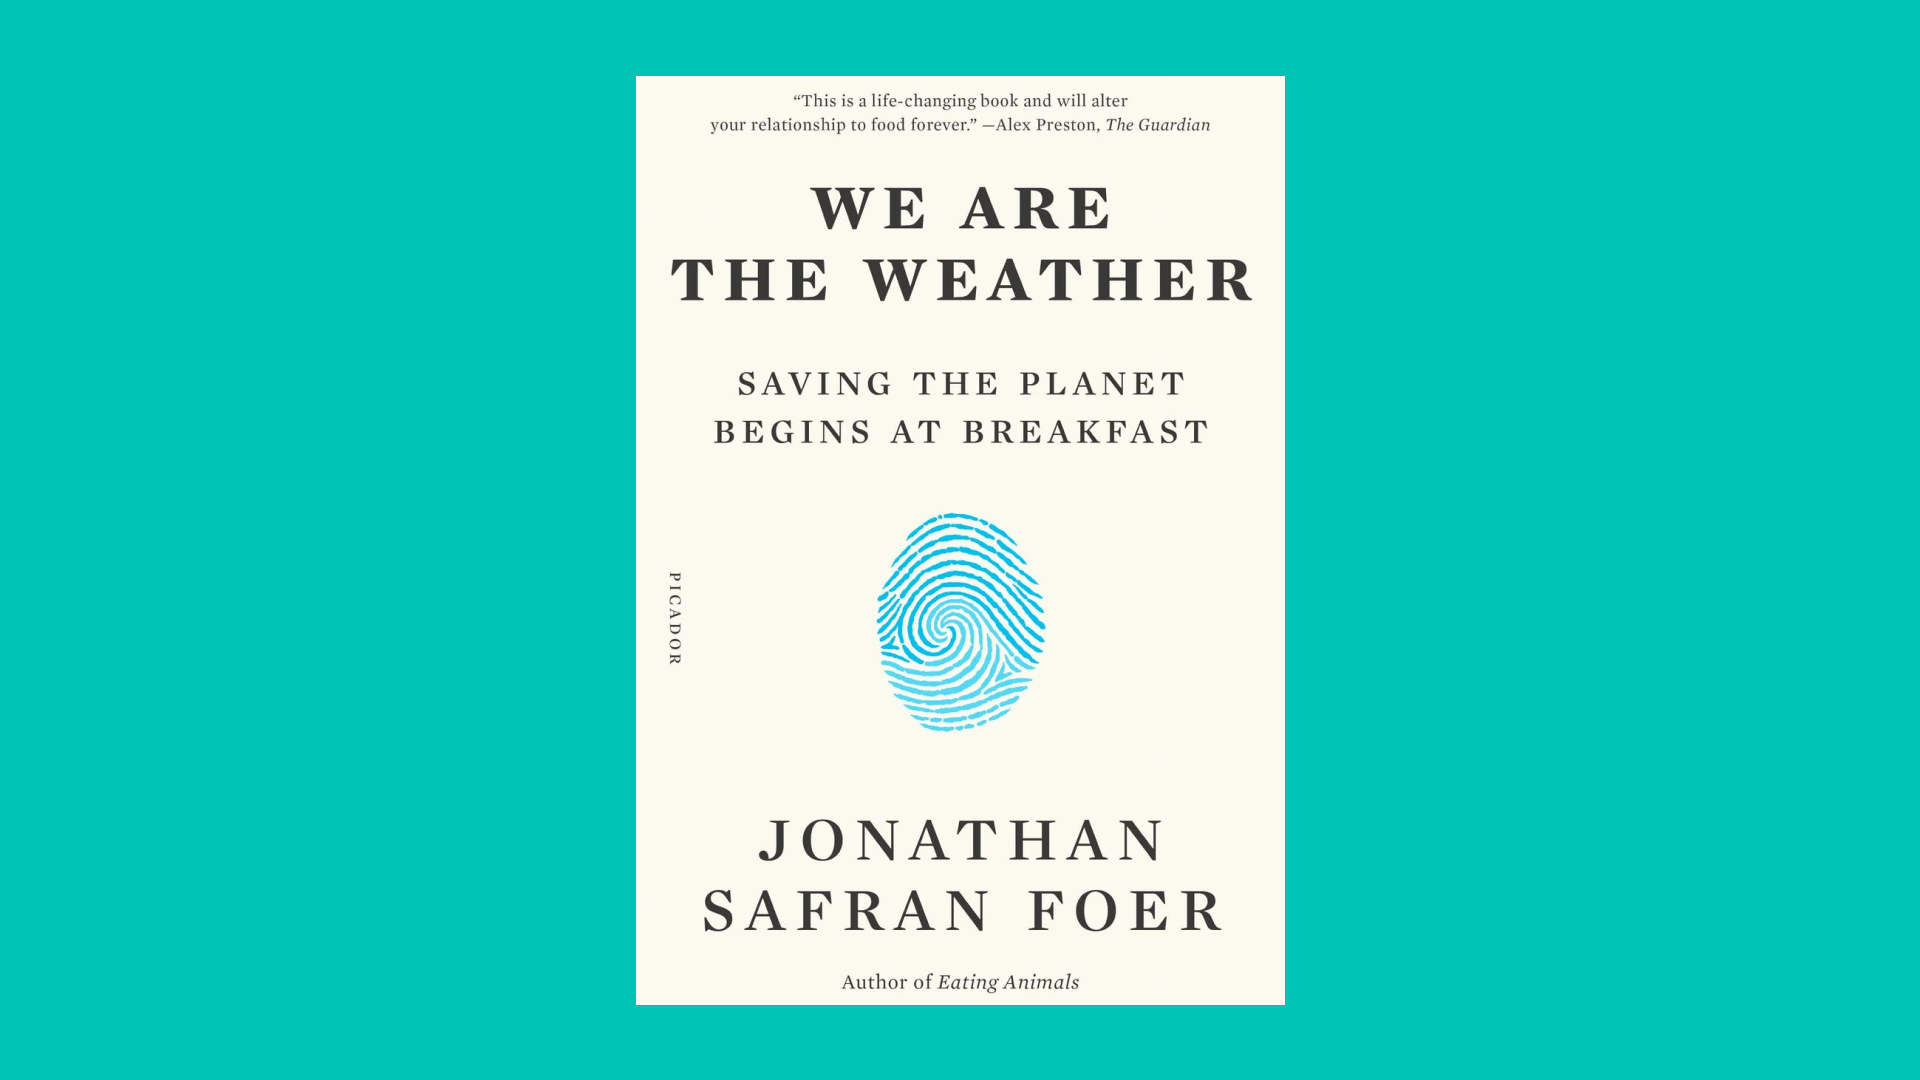 “We Are The Weather” by Jonathan Safran Foer